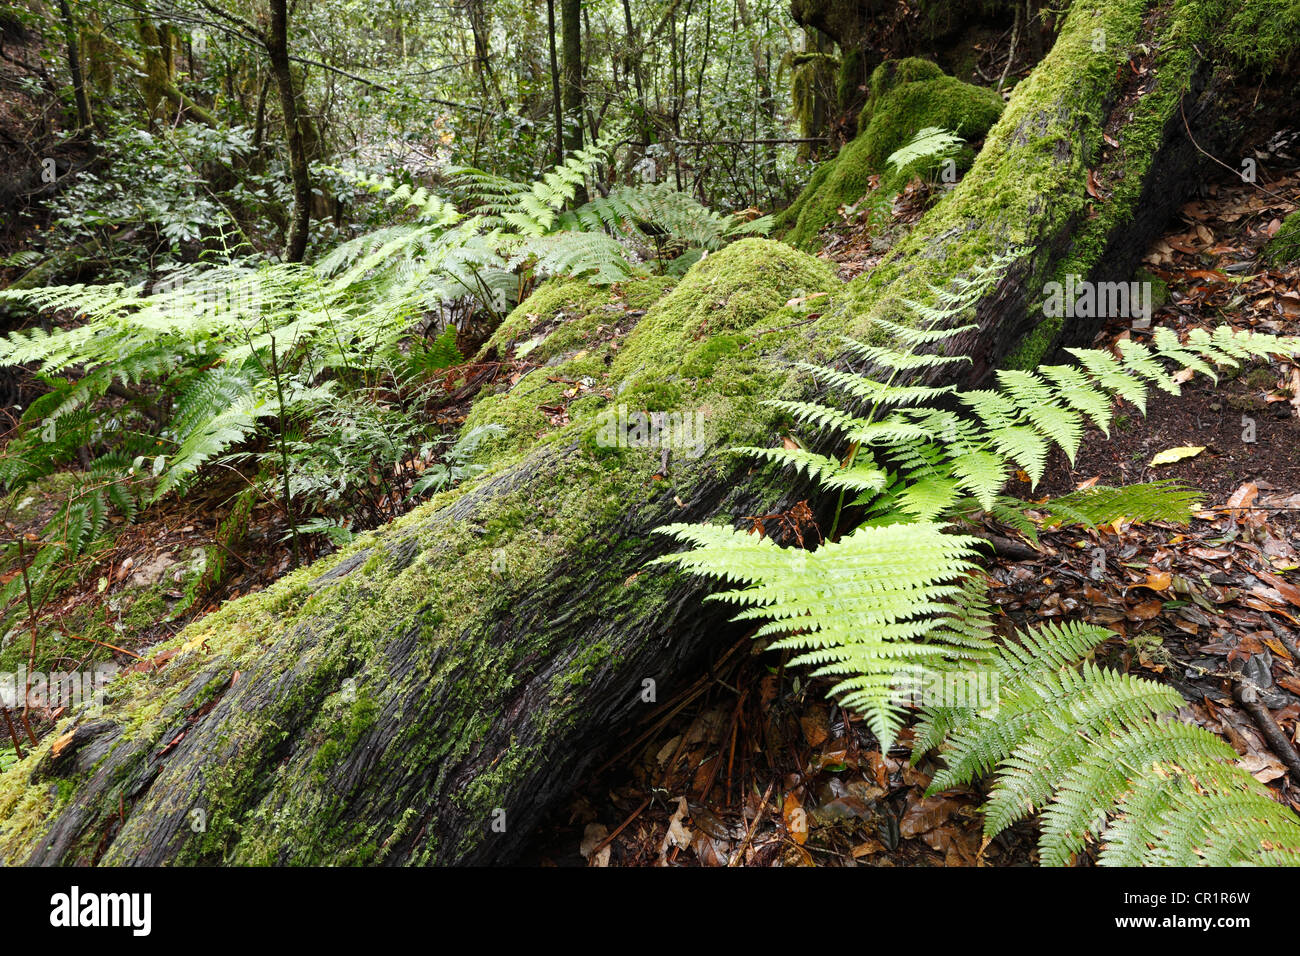 Ferns and moss-covered tree in a laurel forest, Garajonay National Park, La Gomera, Canary Islands, Spain, Europe Stock Photo